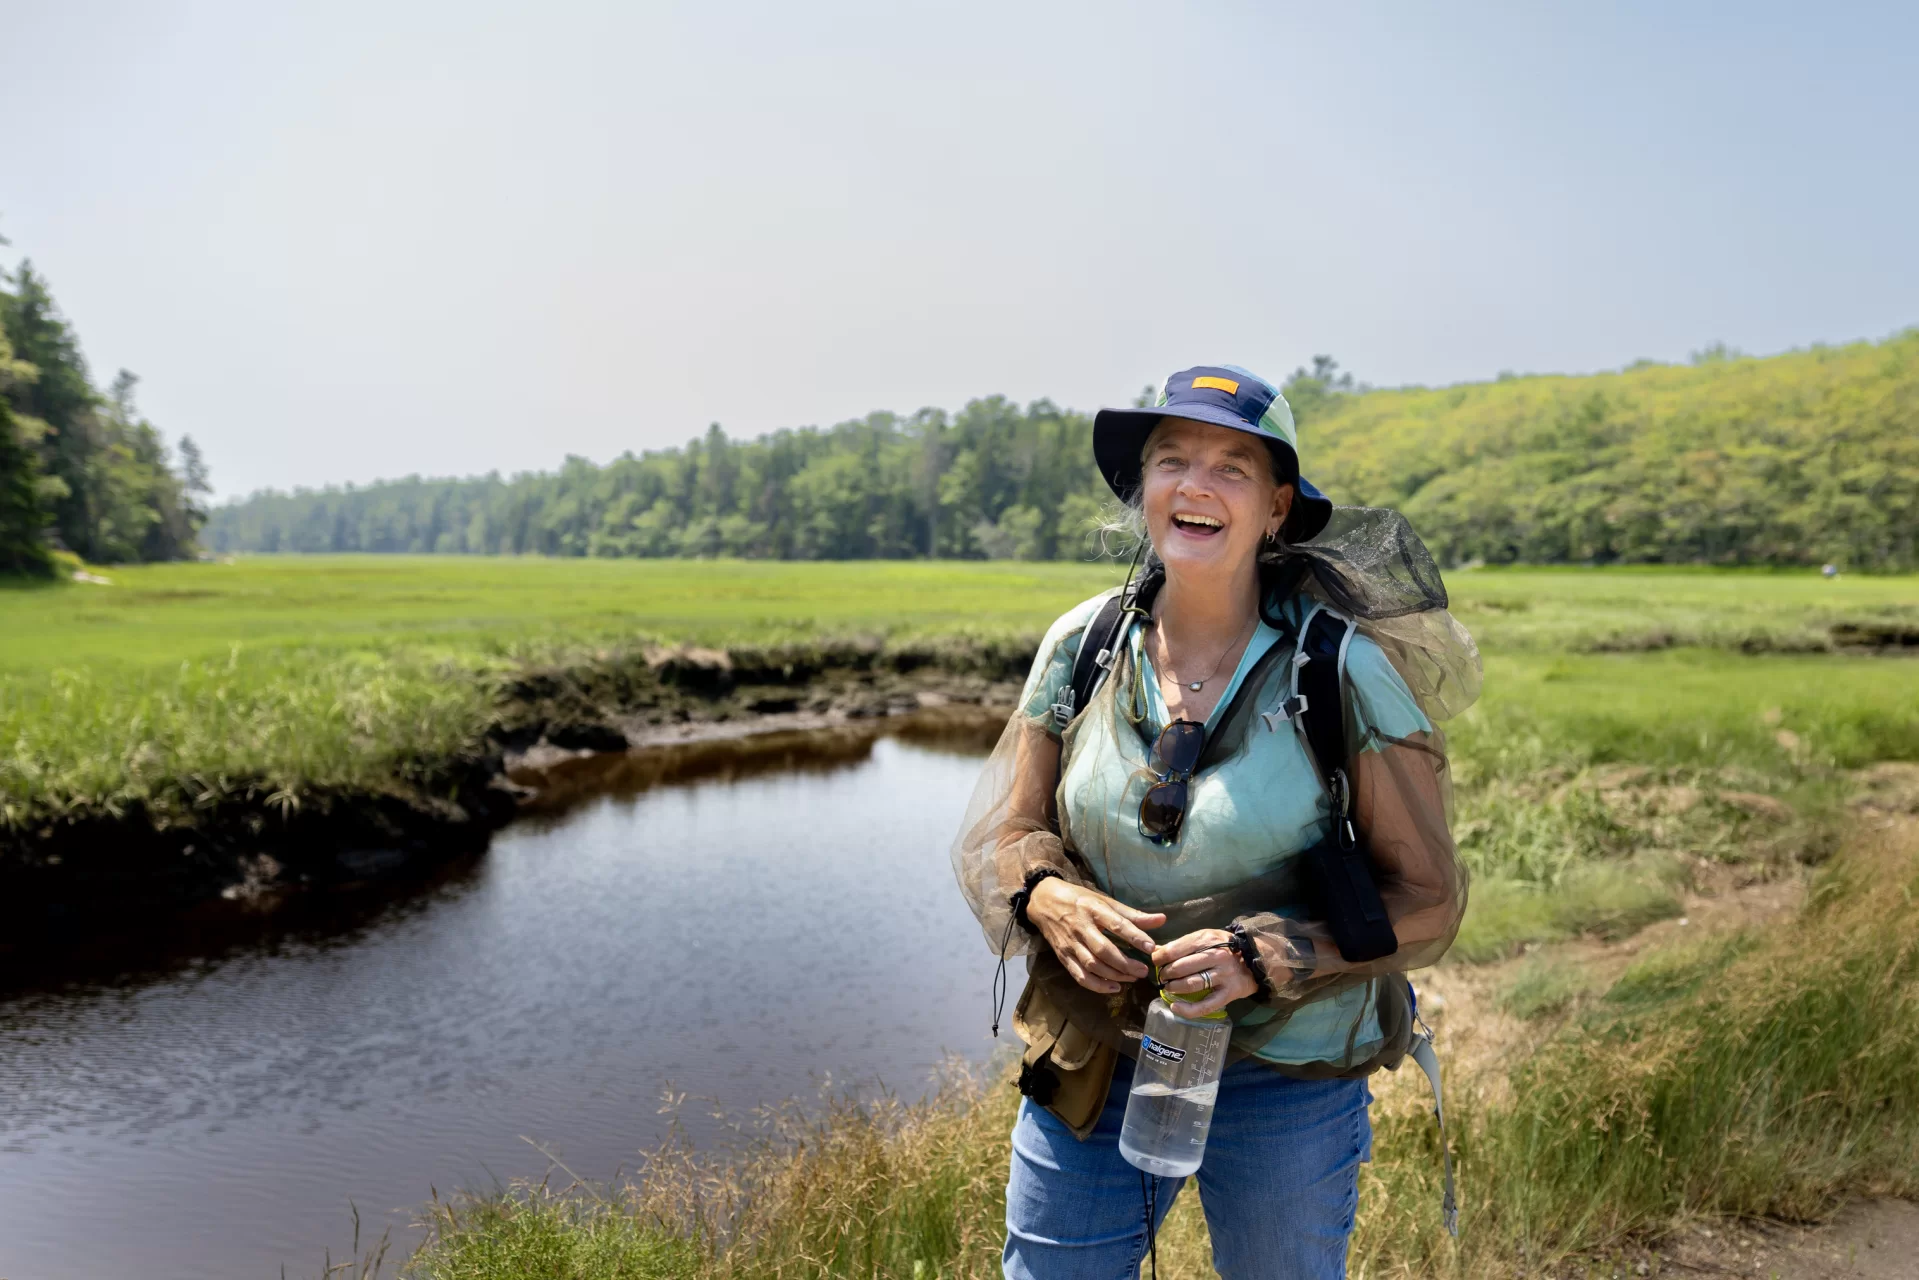 Professor of Earth and Climate Sciences Beverly Johnson takes her summer research students who are studying blue carbon cycling in salt marshes to Bates-MorseMountain in Phippsburg.

An EPA regional assessment of blue carbon stocks has recently been released.  Maine data are almost entirely from Johnson’s lab so Bates is heavily featured (mostly her thesis students).

Anna Sarazin (EACS 2024; funded by Maine Sea Grant) ---- short with red/blonde hair
Kate Dickson (EACS 2024; funded by Maine Sea Grant) ---- tall, carried the backpack, red hair
Hayden Eckblom (EACS 2025; funded by Maine Climate Science Information Exchange) --- the only male
Fiona Wilson (Biology, 2025; funded by Maine Community Foundation) ----- the one wearing all the netting, blondish/red hair in pigtails
Evelyn Marchand (EACS 2026; funded by Maine Community Foundation) --- dark hair